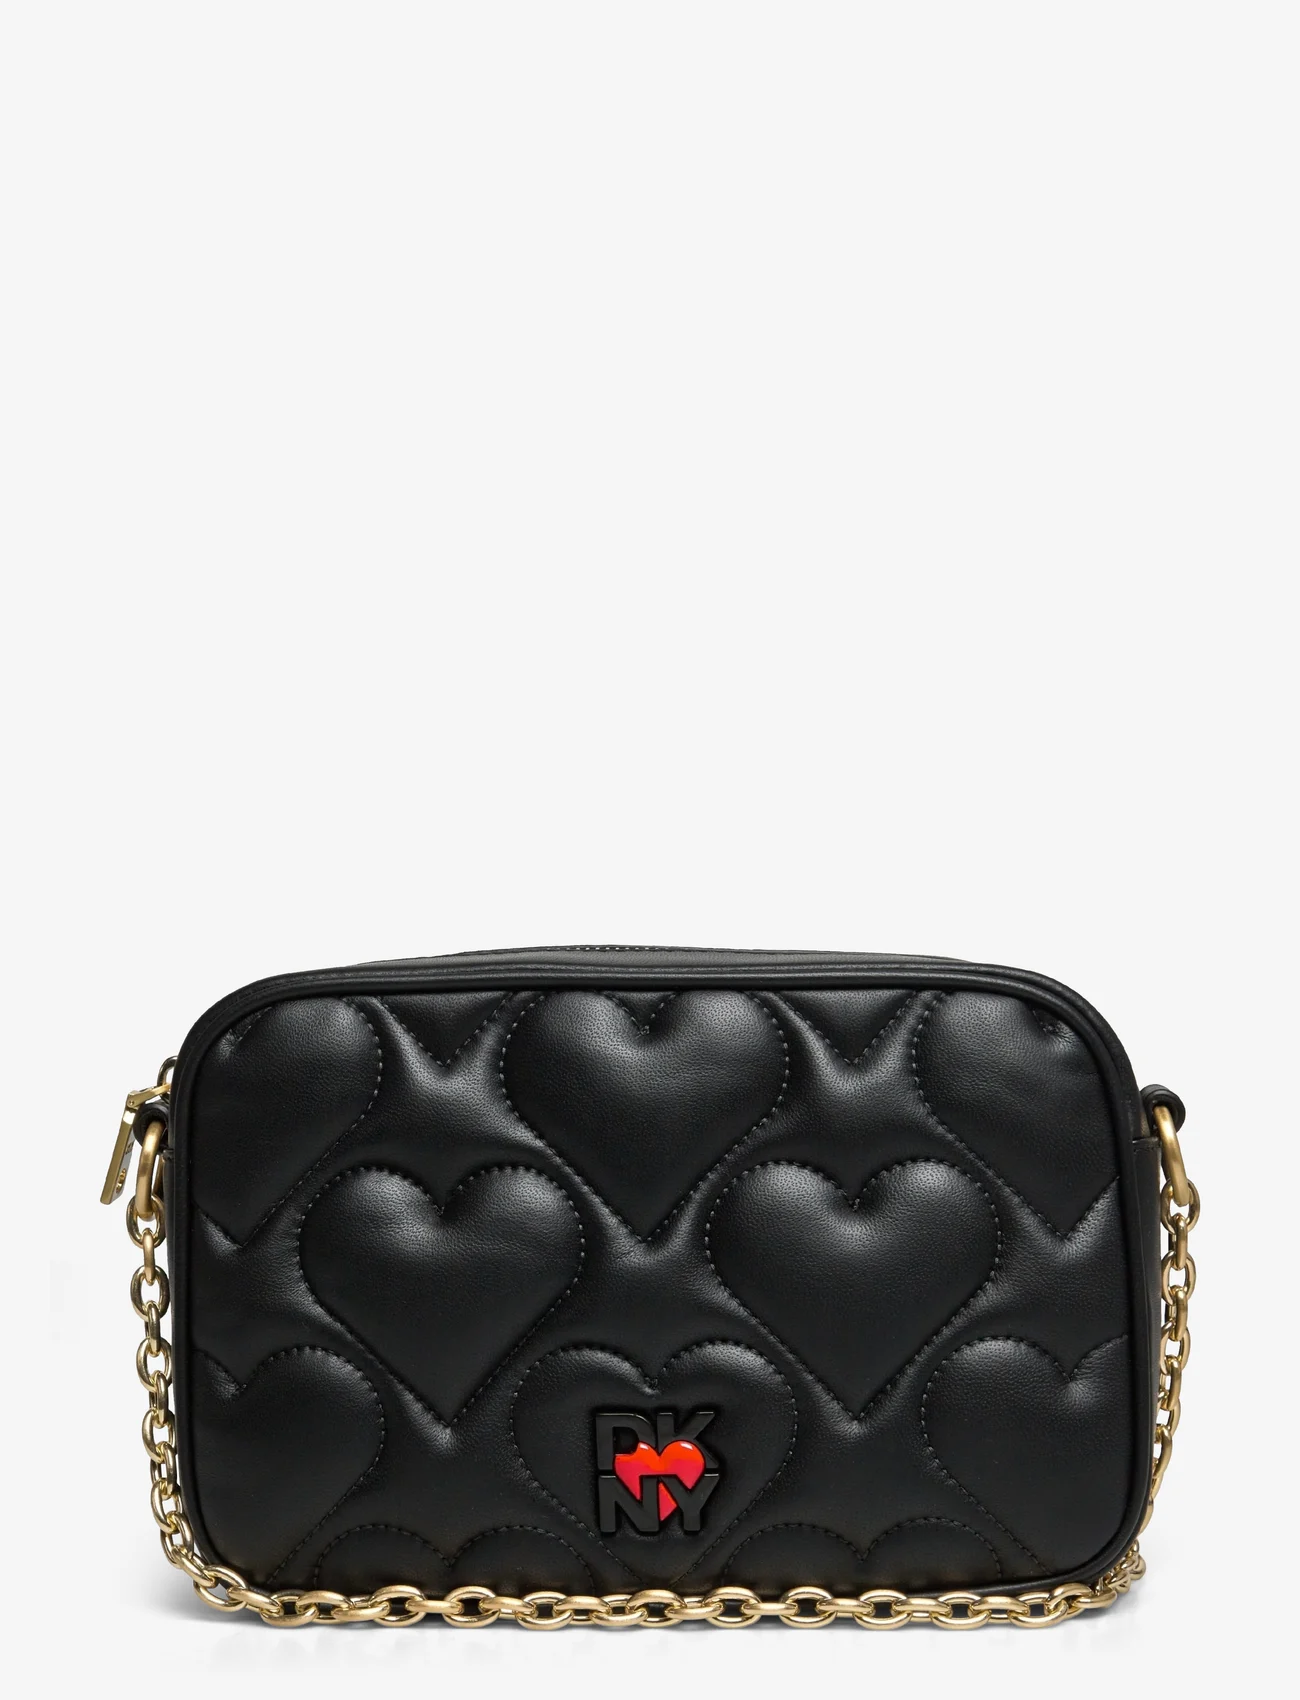 DKNY Bags - HEART OF NY QUILTED BAG - confirmation - bgd - blk/gold - 0